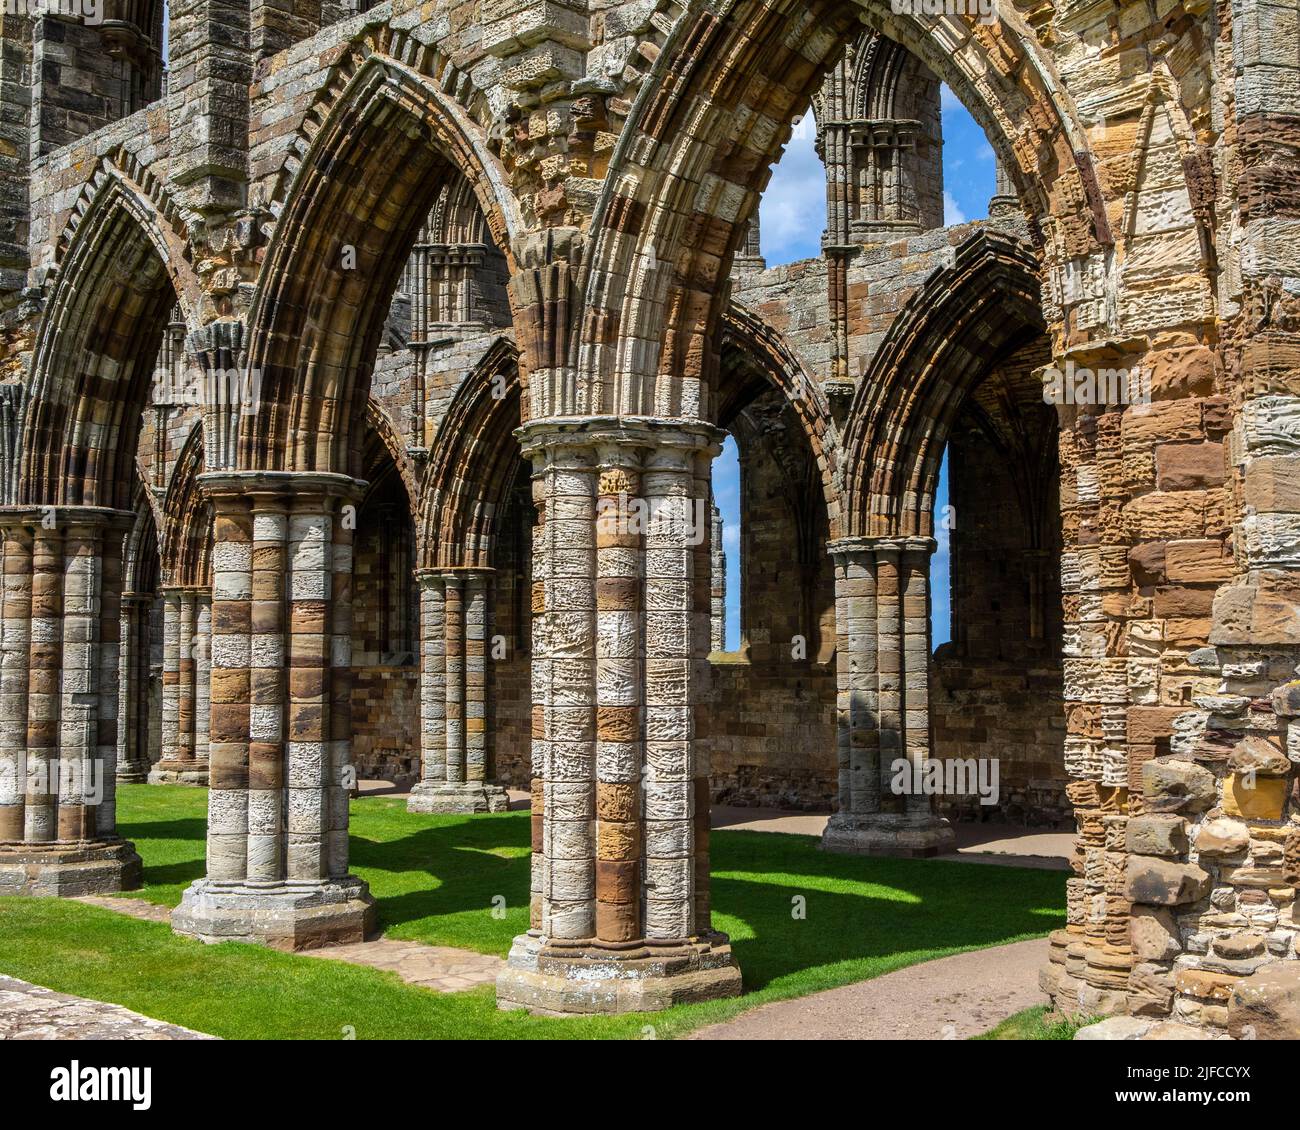 View of the historic Whitby Abbey in the town of Whitby in North Yorkshire, UK. Stock Photo